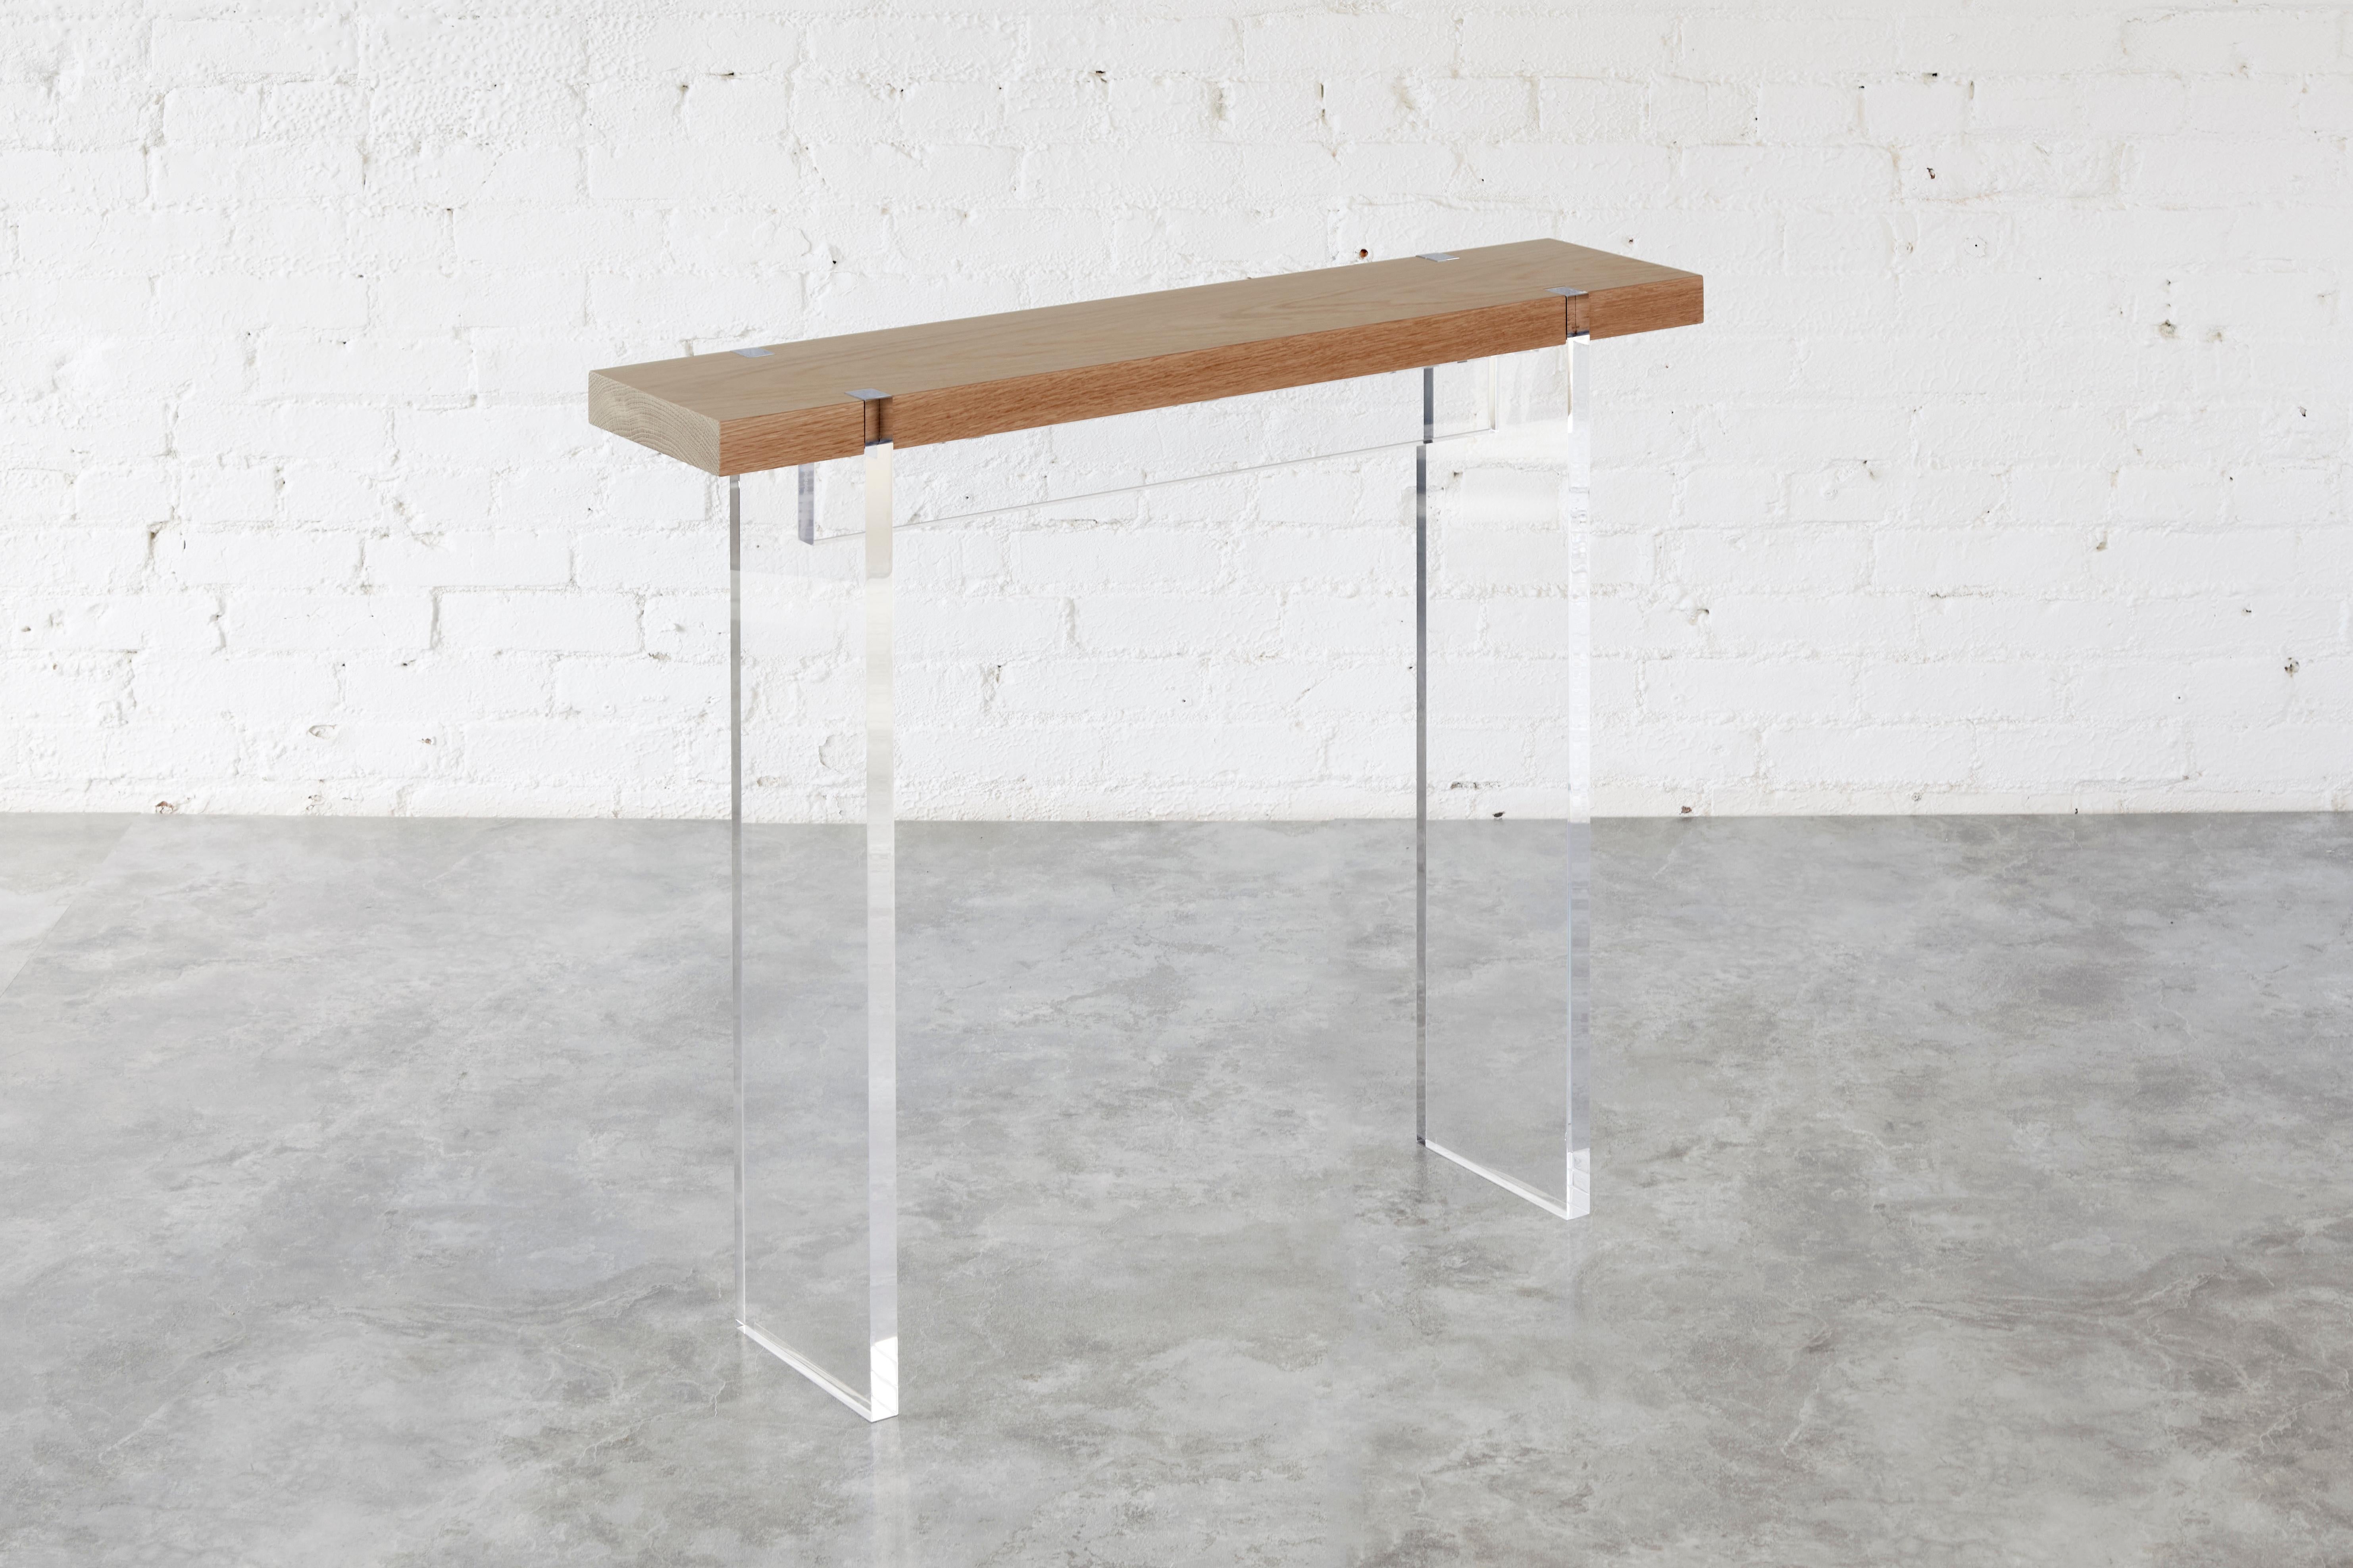 A tailored version of our original Tillikum Console, the Tillikum Narrow Console is a scaled down version to suit a smaller space. This stunning piece features a floating tabletop supported by sleek acrylic legs, creating a modern statement in any